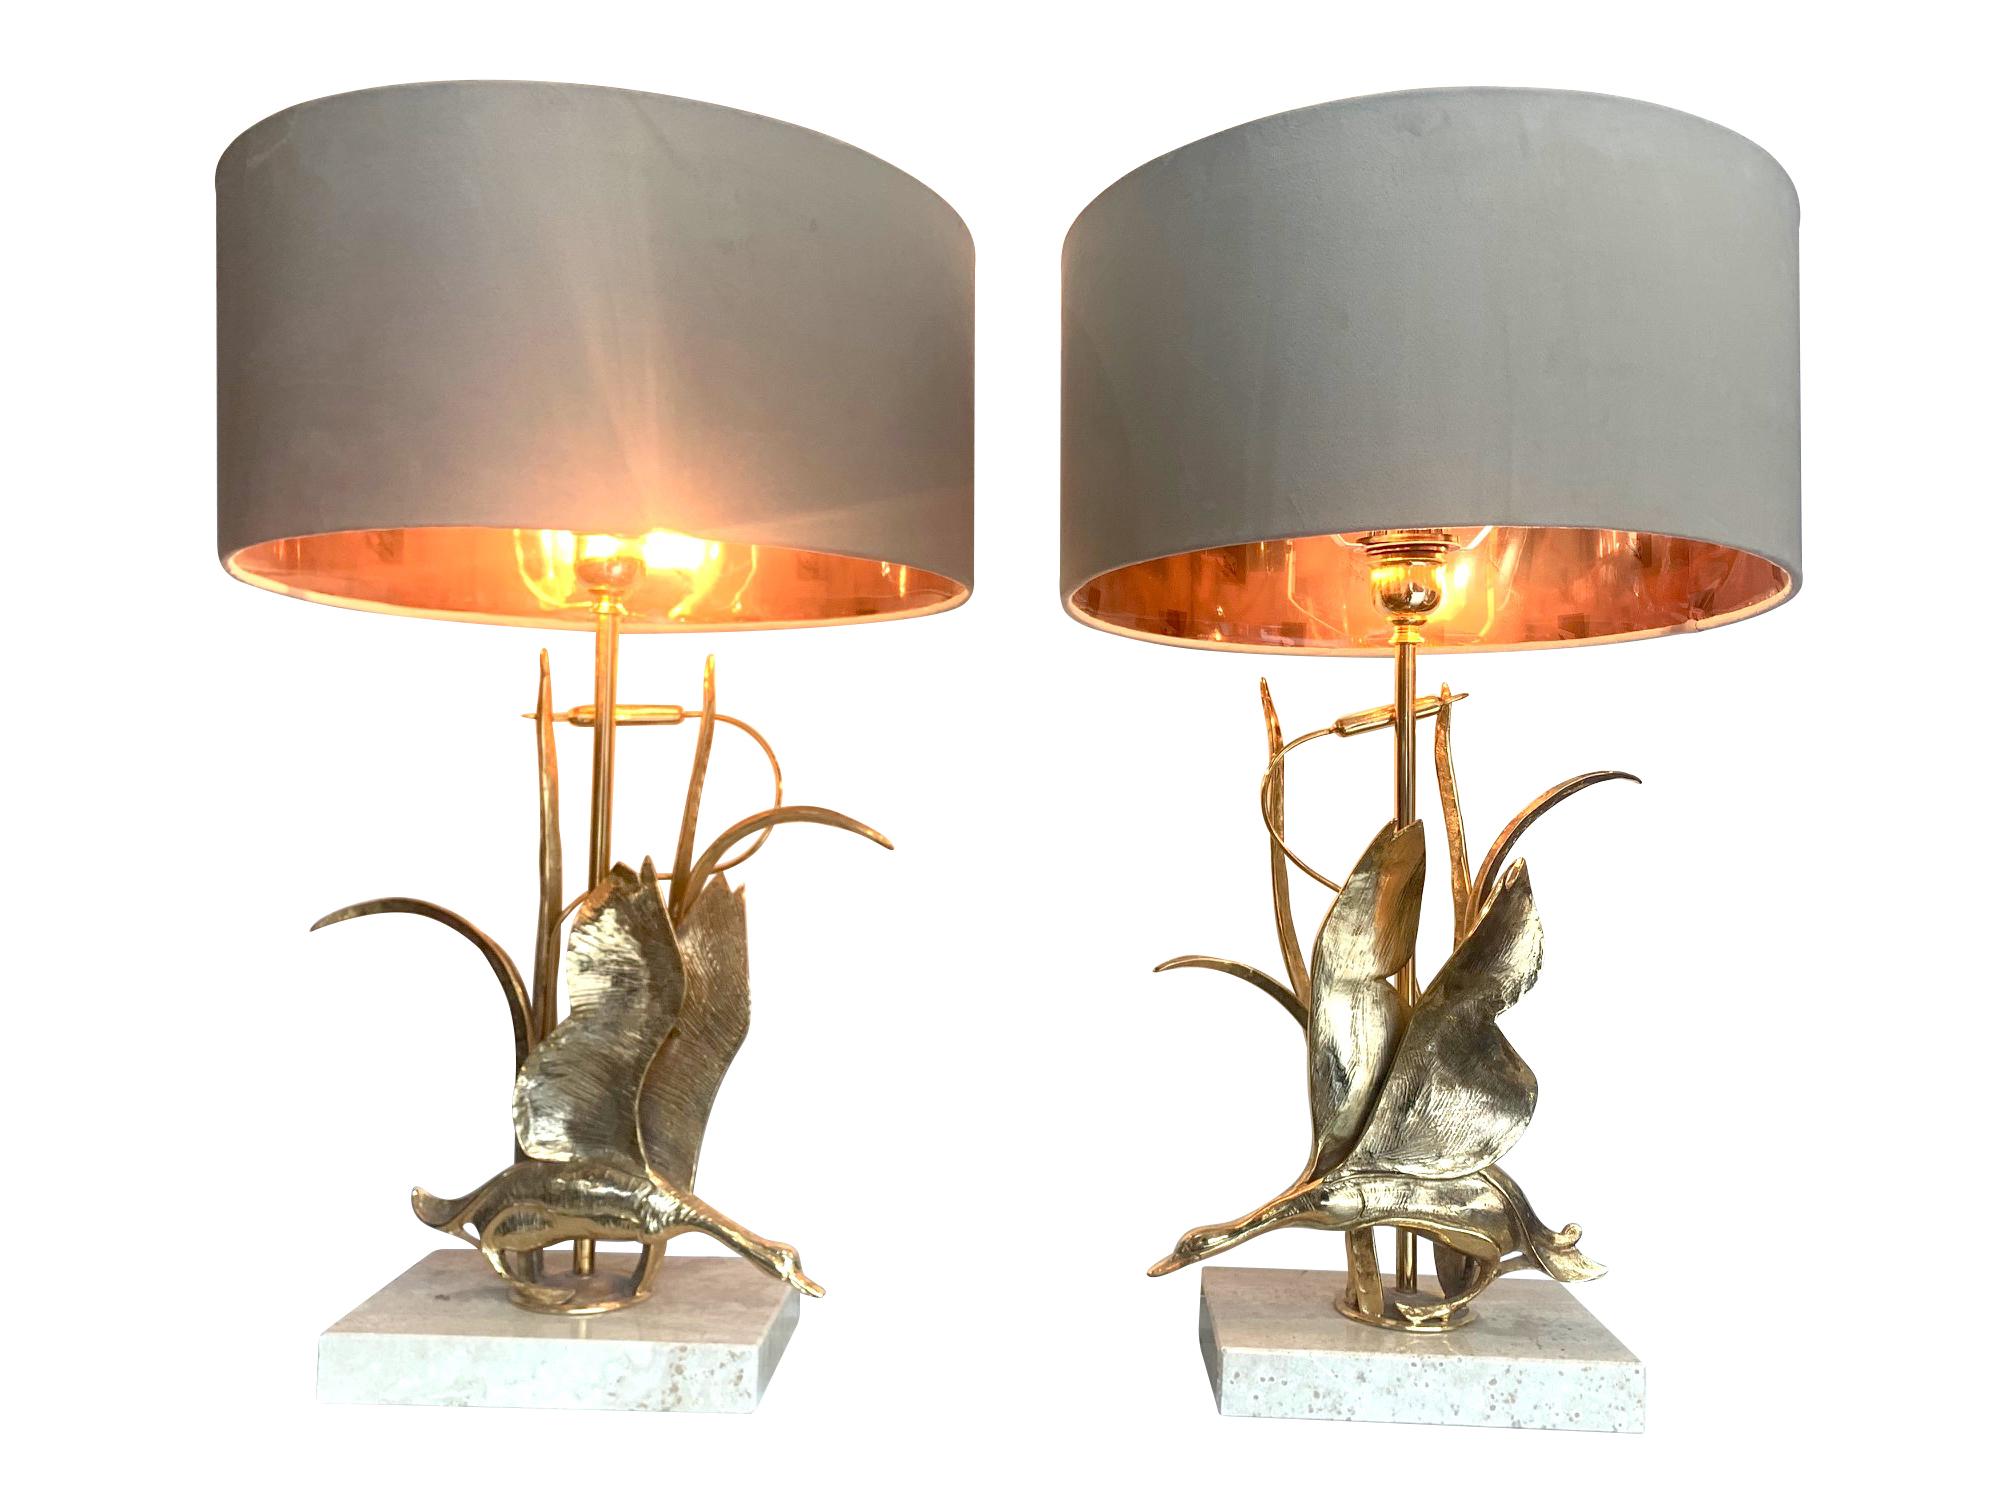 A lovely pair of 1970s brass duck lamps by Lanciotto. Galeotti for Italian company L'Originale each with a brass duck flying out of the bullrushes, mounted on travertine bases with a single fitting in each. Re wired with antique gold cord flex and